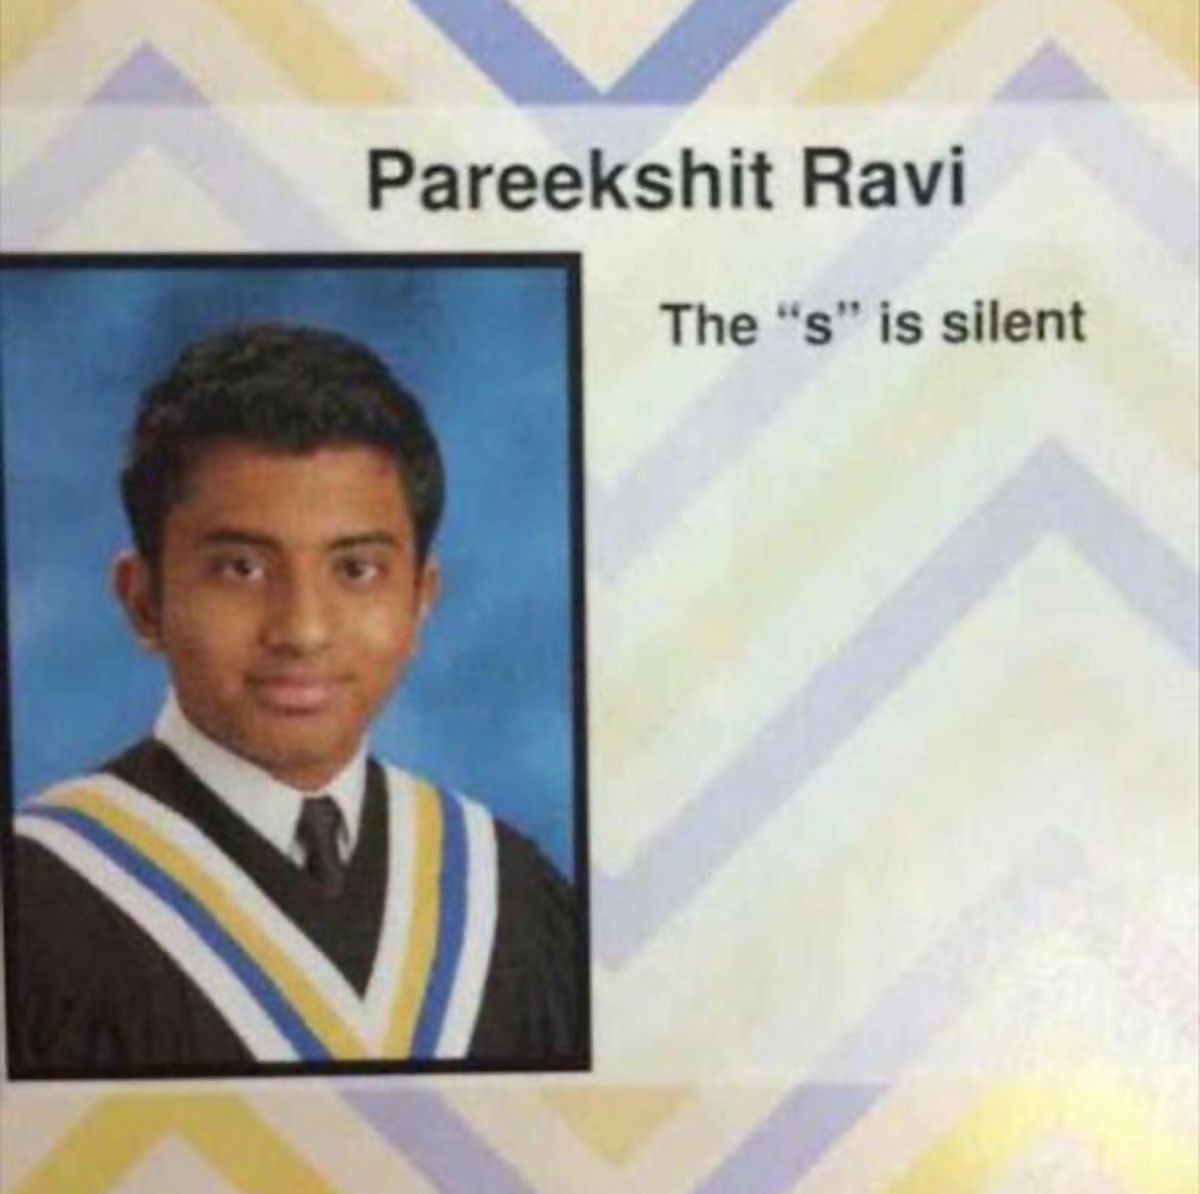 http://livestly.com/wp-content/uploads/2017/05/funniest-ever-yearbook-quotes-22-1494898720624.jpg